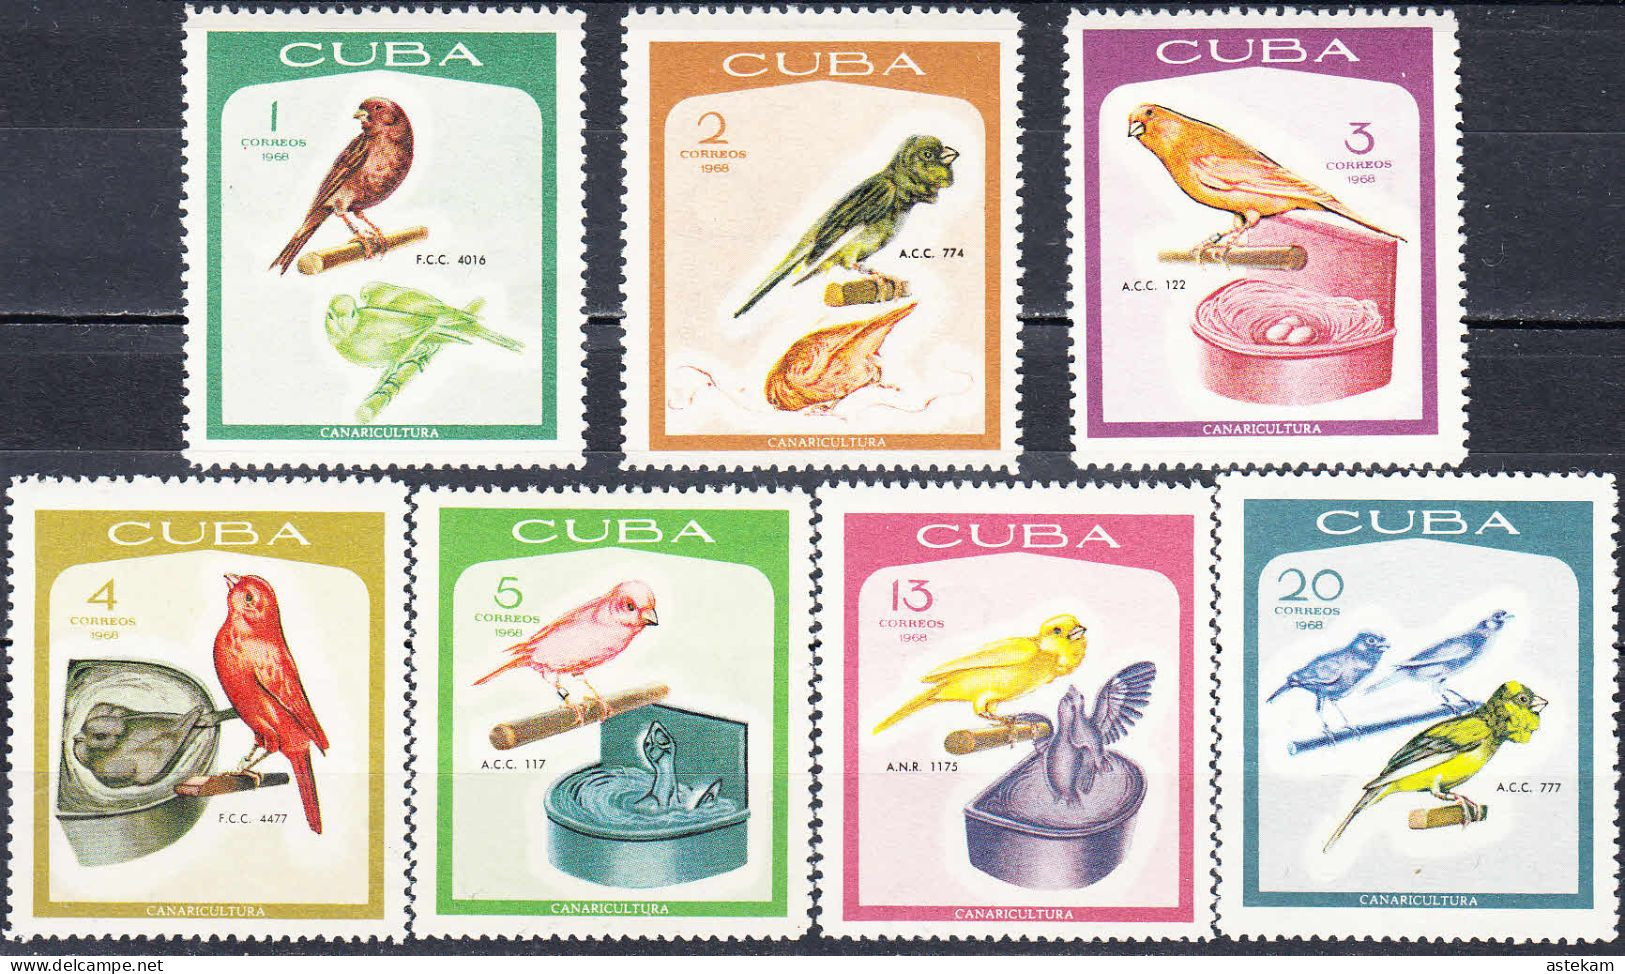 CUBA 1968, FAUNA, BIRDS, COMPLETE, MNH SERIES With GOOD QUALITY, *** - Unused Stamps